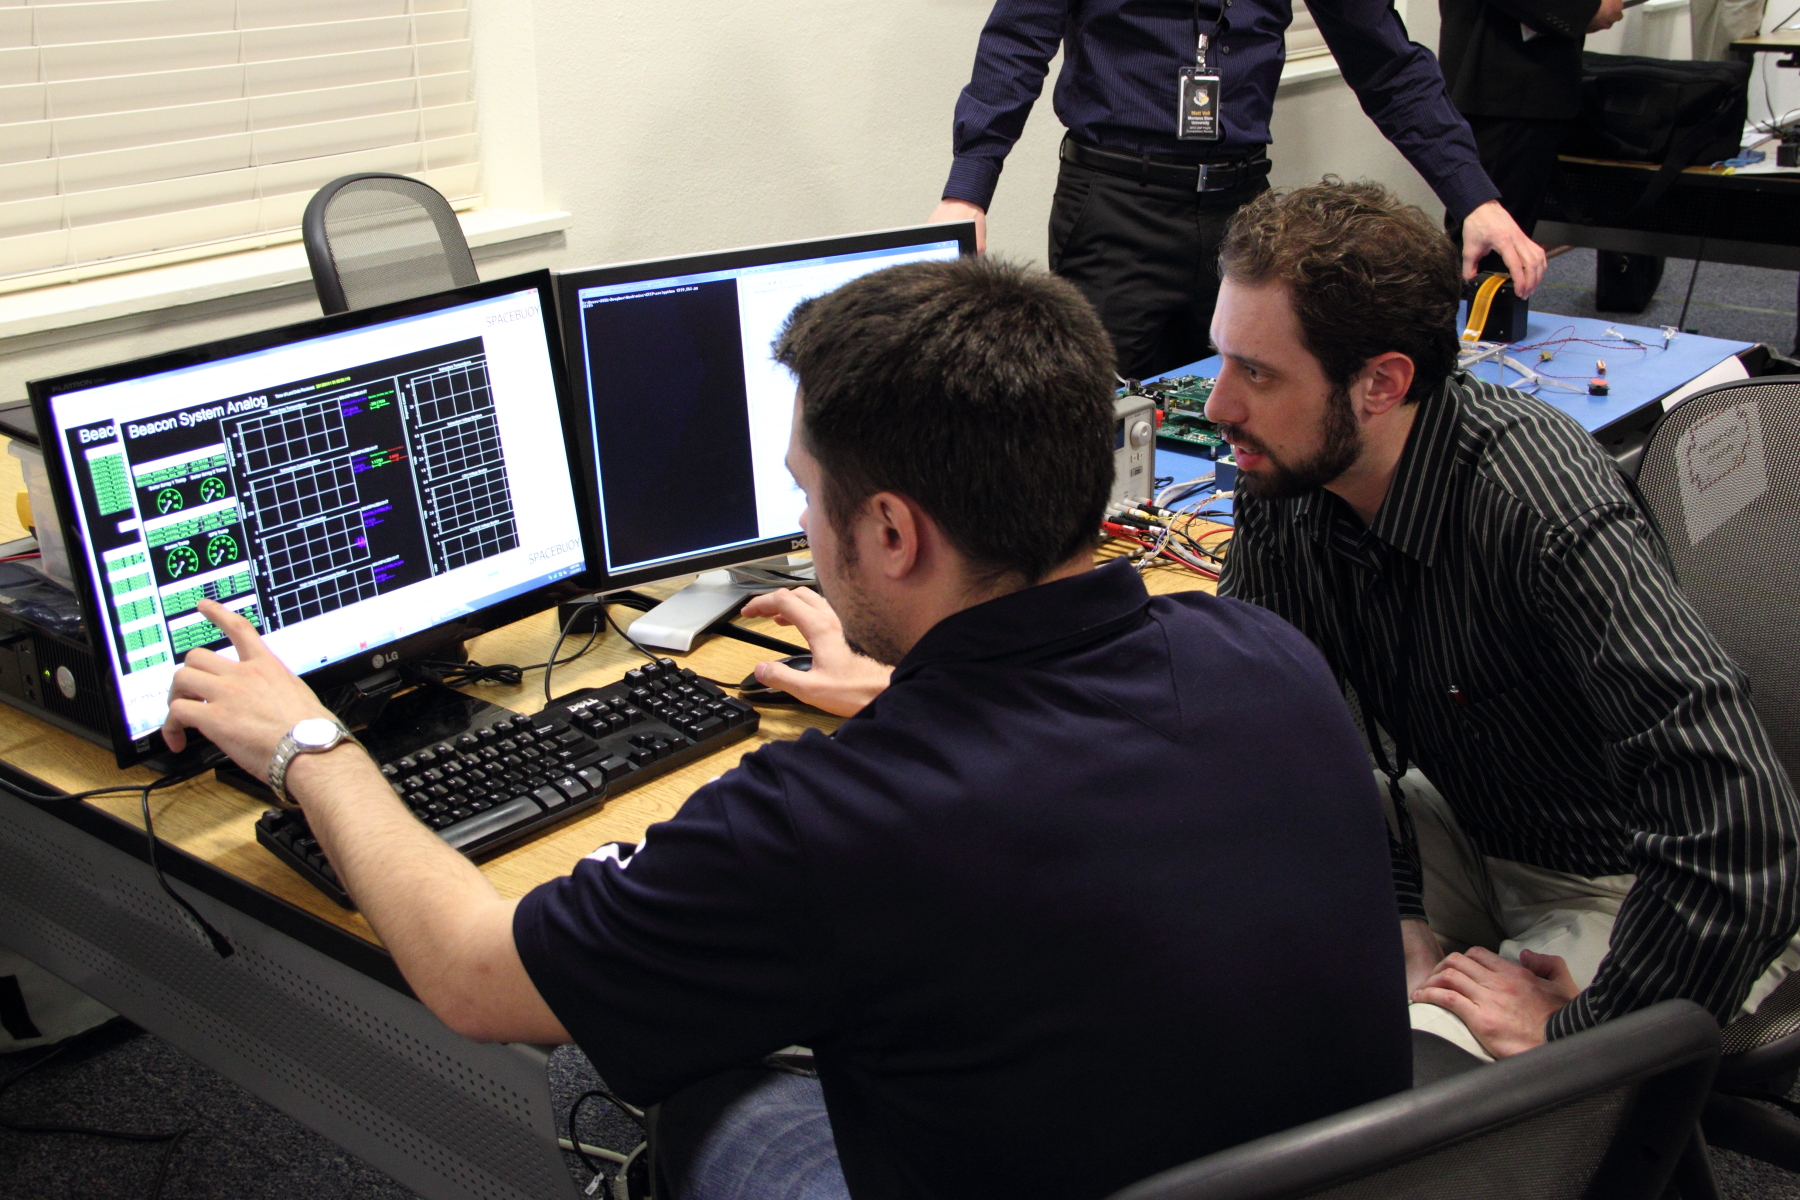 A pair of students arranging windows in the InControl software